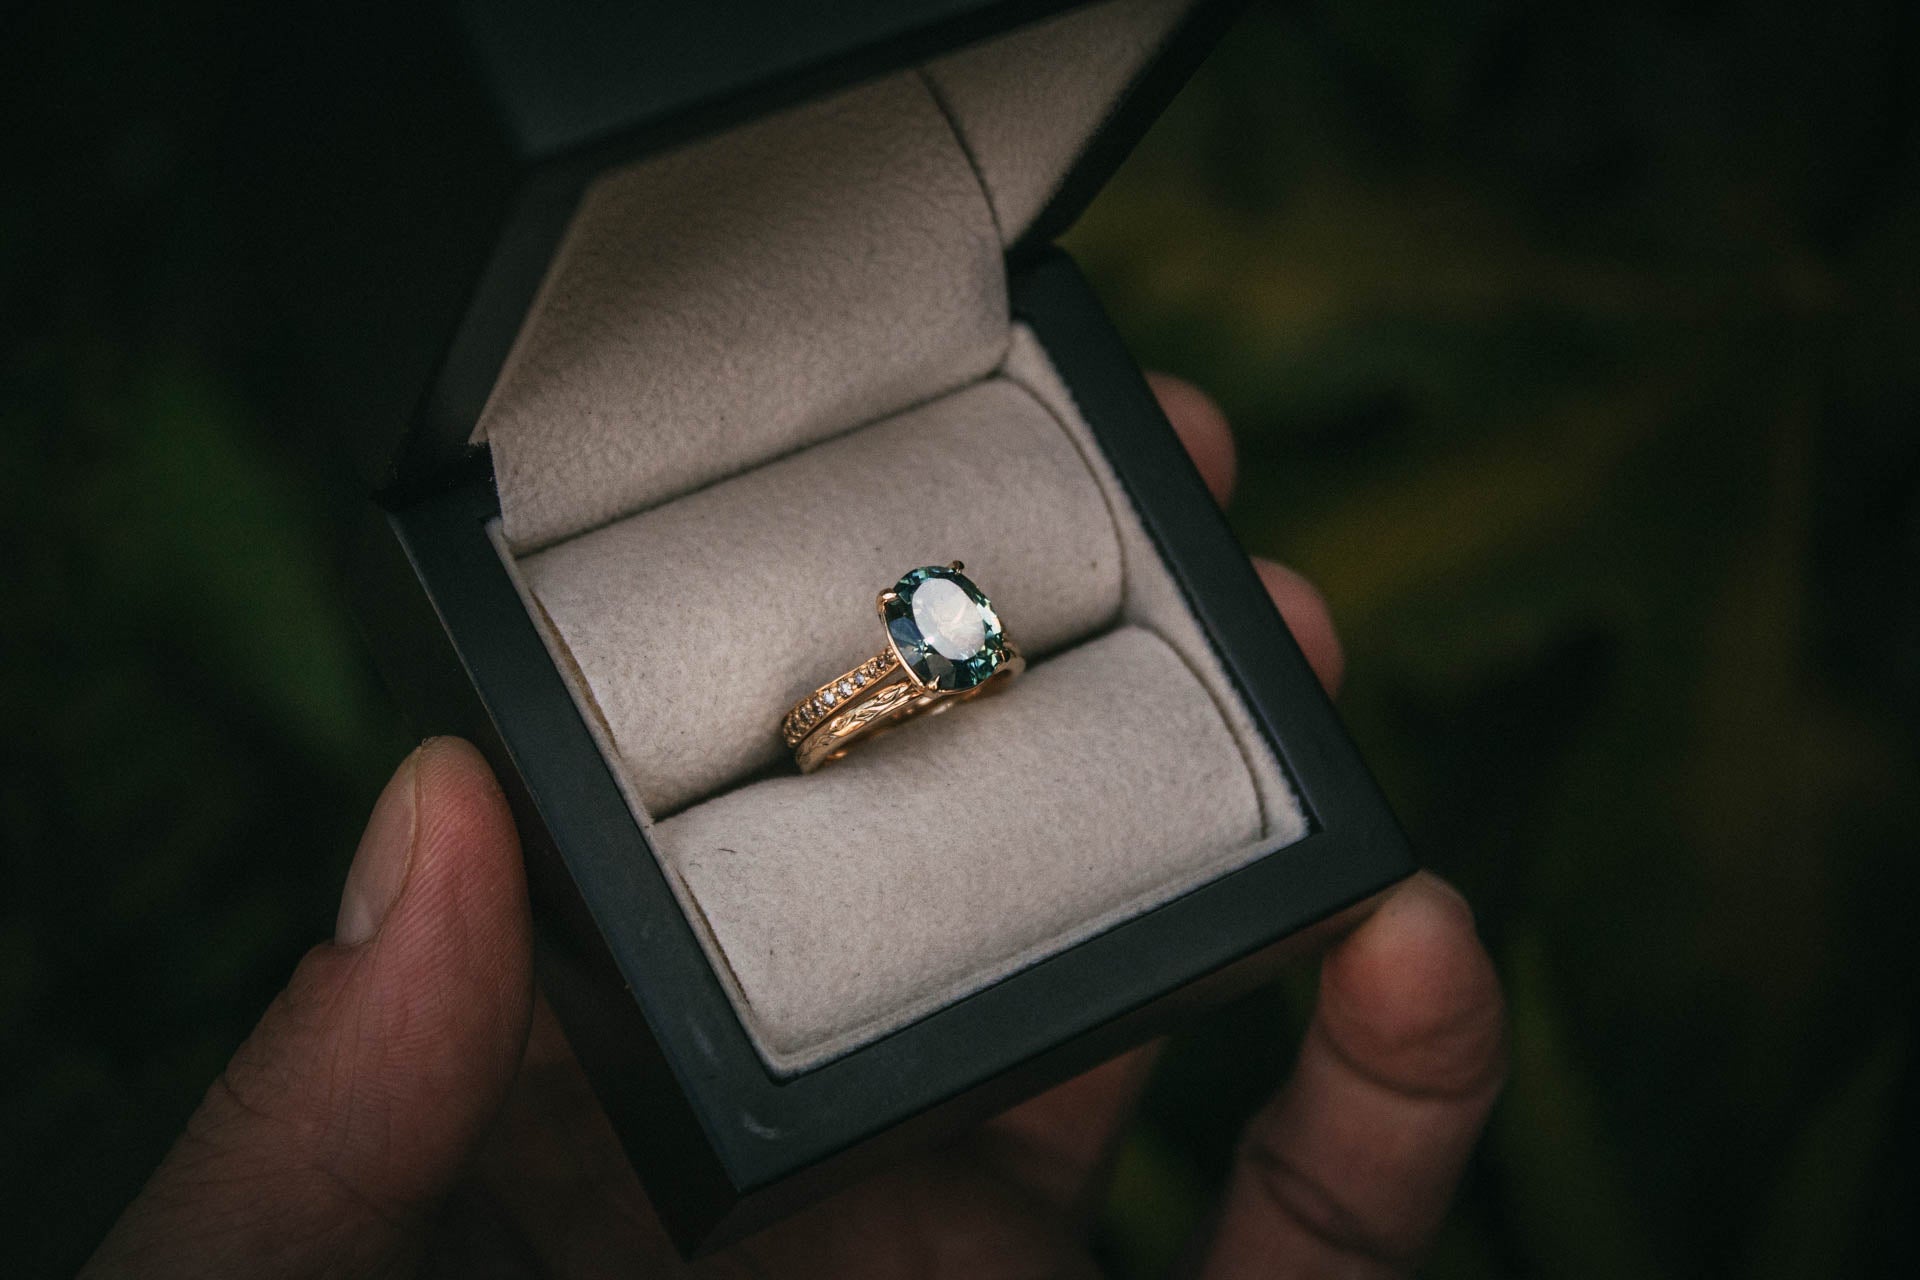 Bespoke Teal Sapphire and Champagne Diamond Engagement Ring